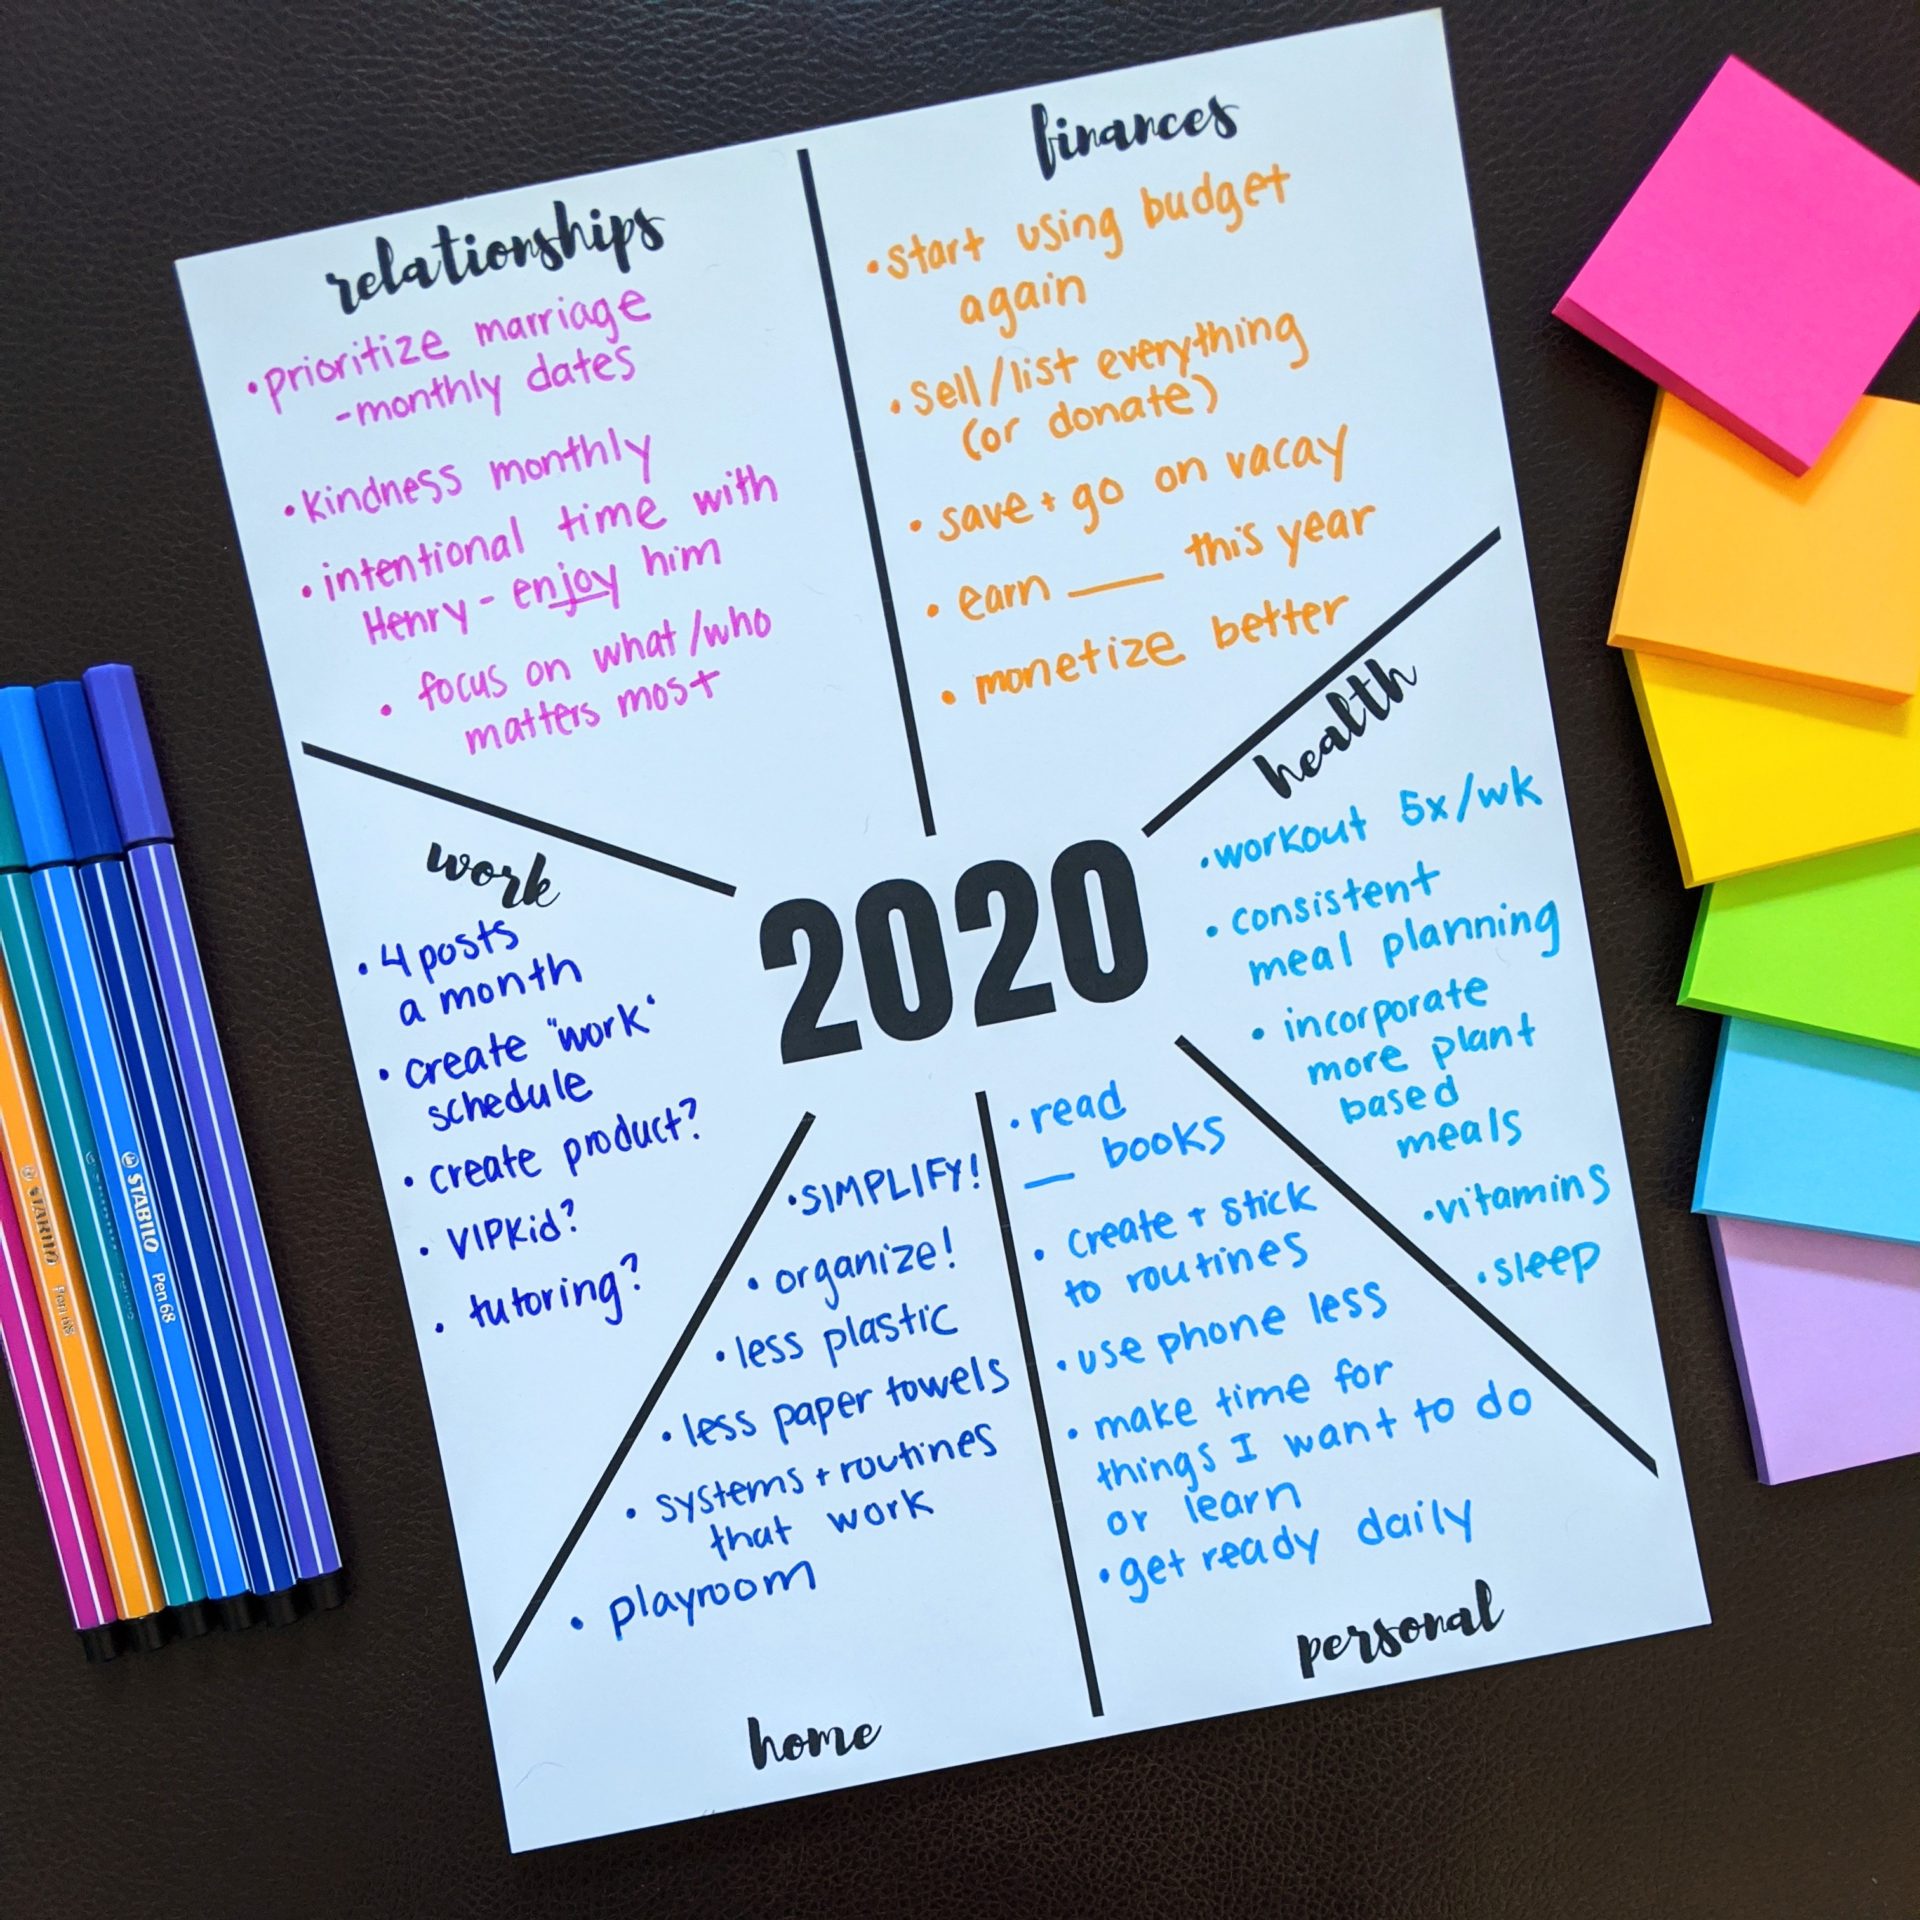 2020 New Year s Goals Printables Let s Live and Learn